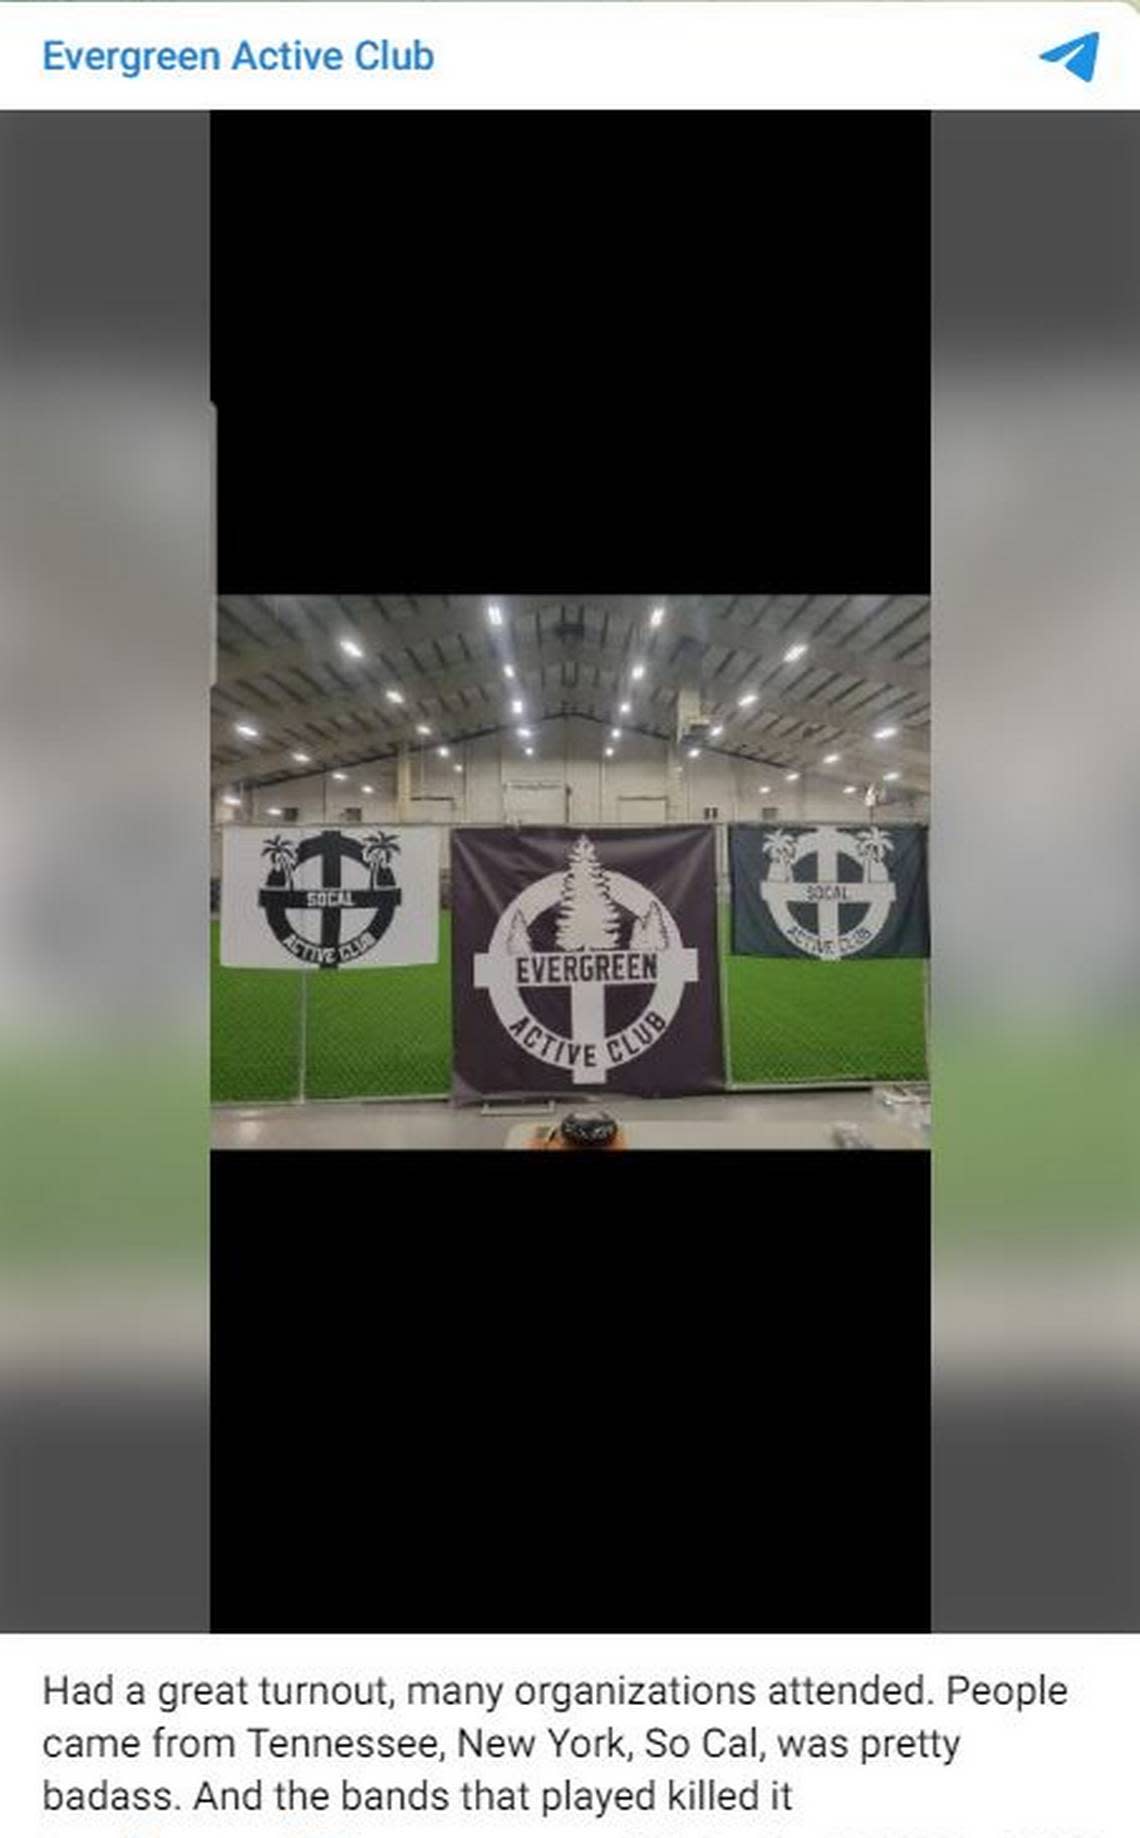 A picture posted in Evergreen Active Club’s Telegram channel shows banners hoisted up at the HAPO Center in Pasco, WA. The white supremacist fighting group lied to a sub-leaser at the facility and convinced them to host a fight event last month.